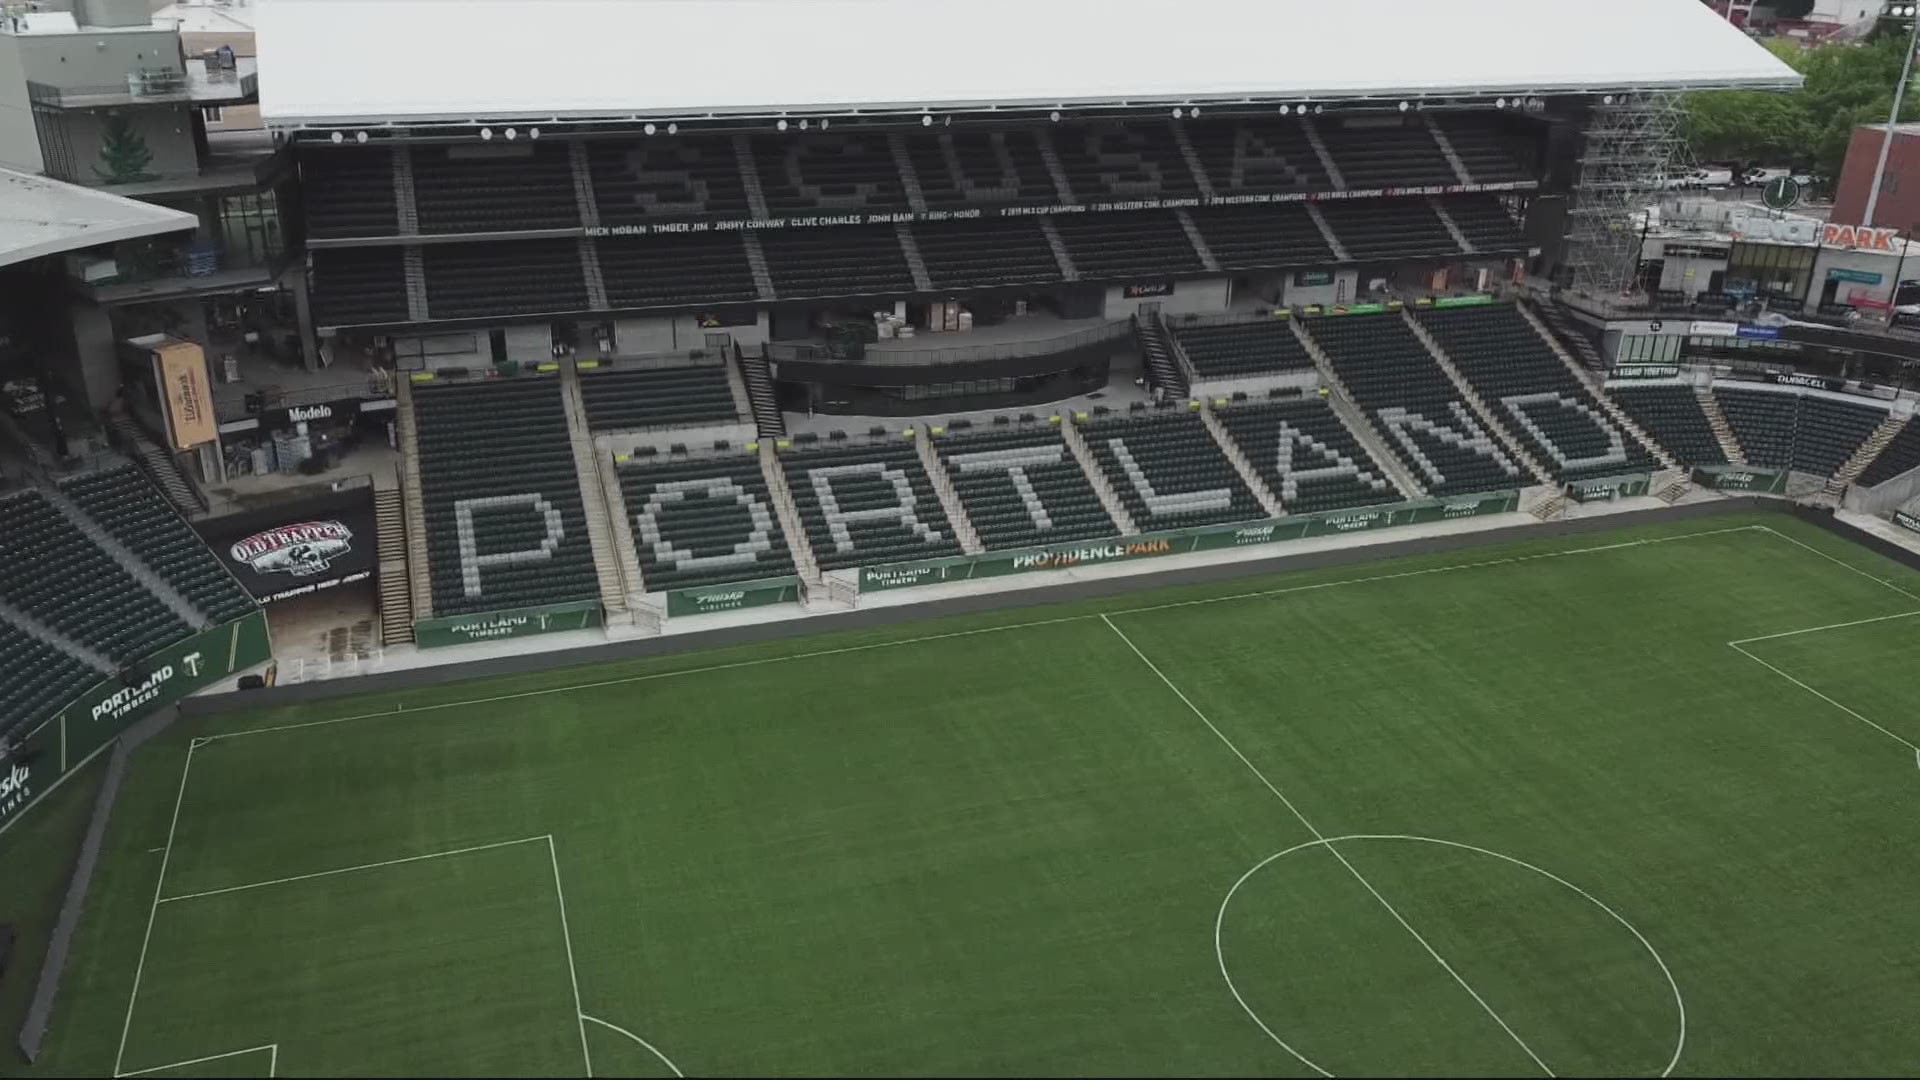 Portland Public Schools announced Tuesday night that all comprehensive high schools will have their graduations at Providence Park in June.